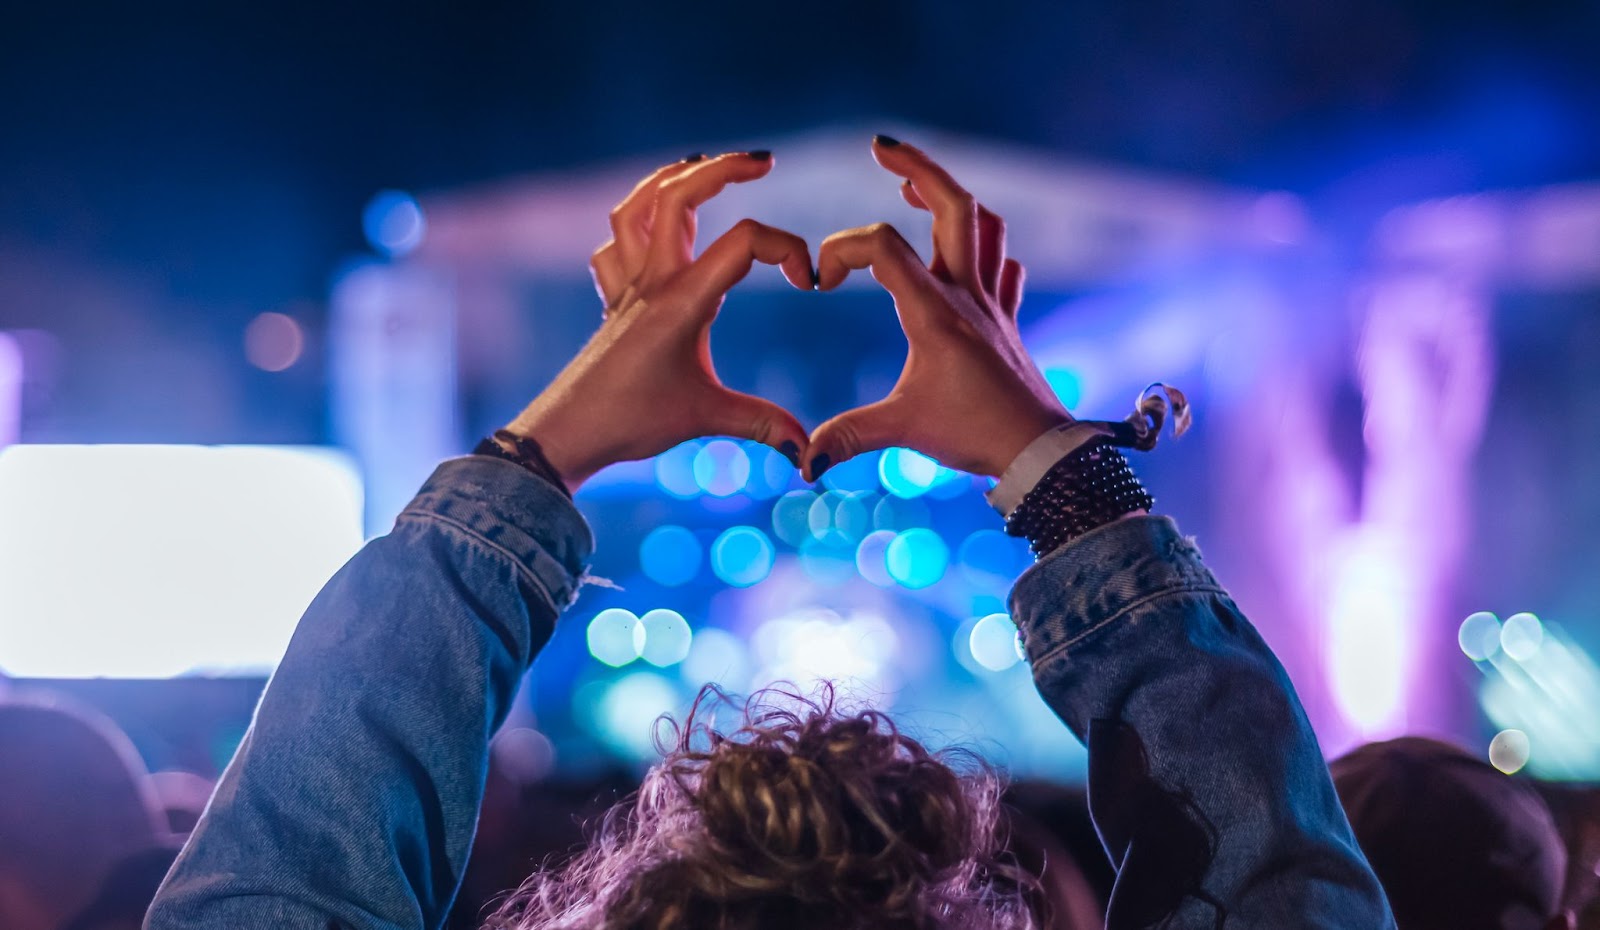 Fan at a music concert with hands raised and fingers in the shape of a heart. 